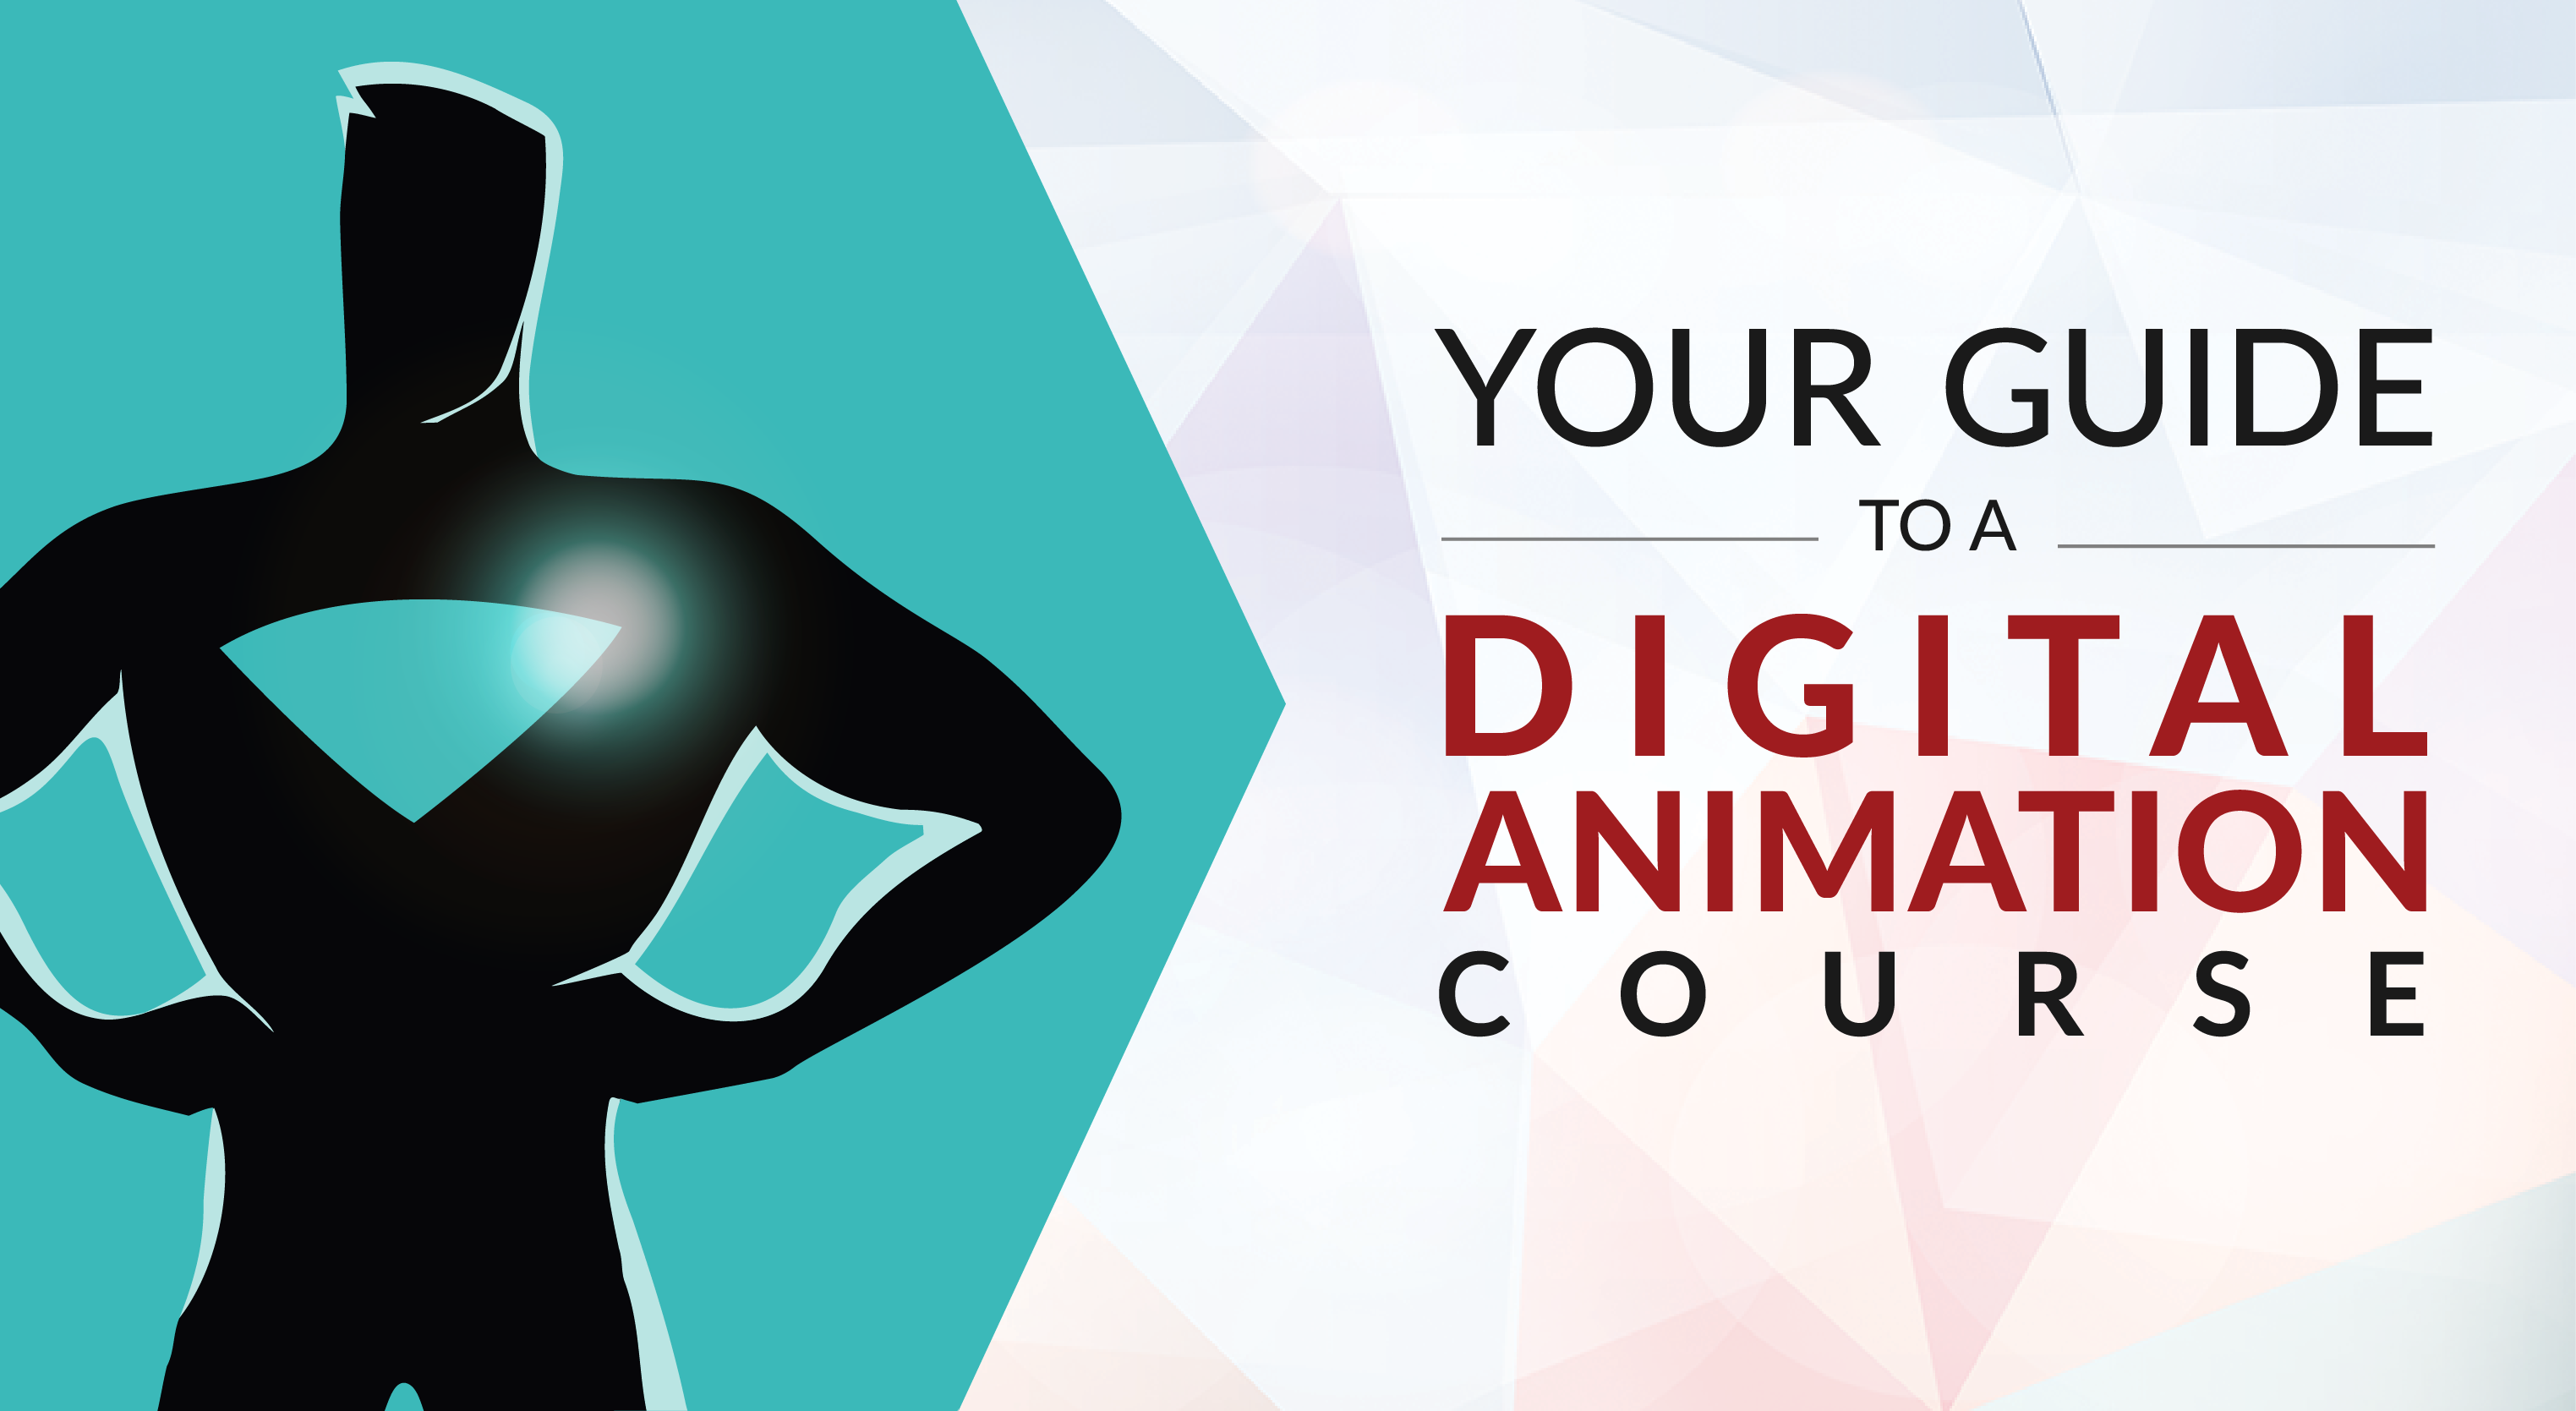 Digital Animation Course in Malaysia - What It Is